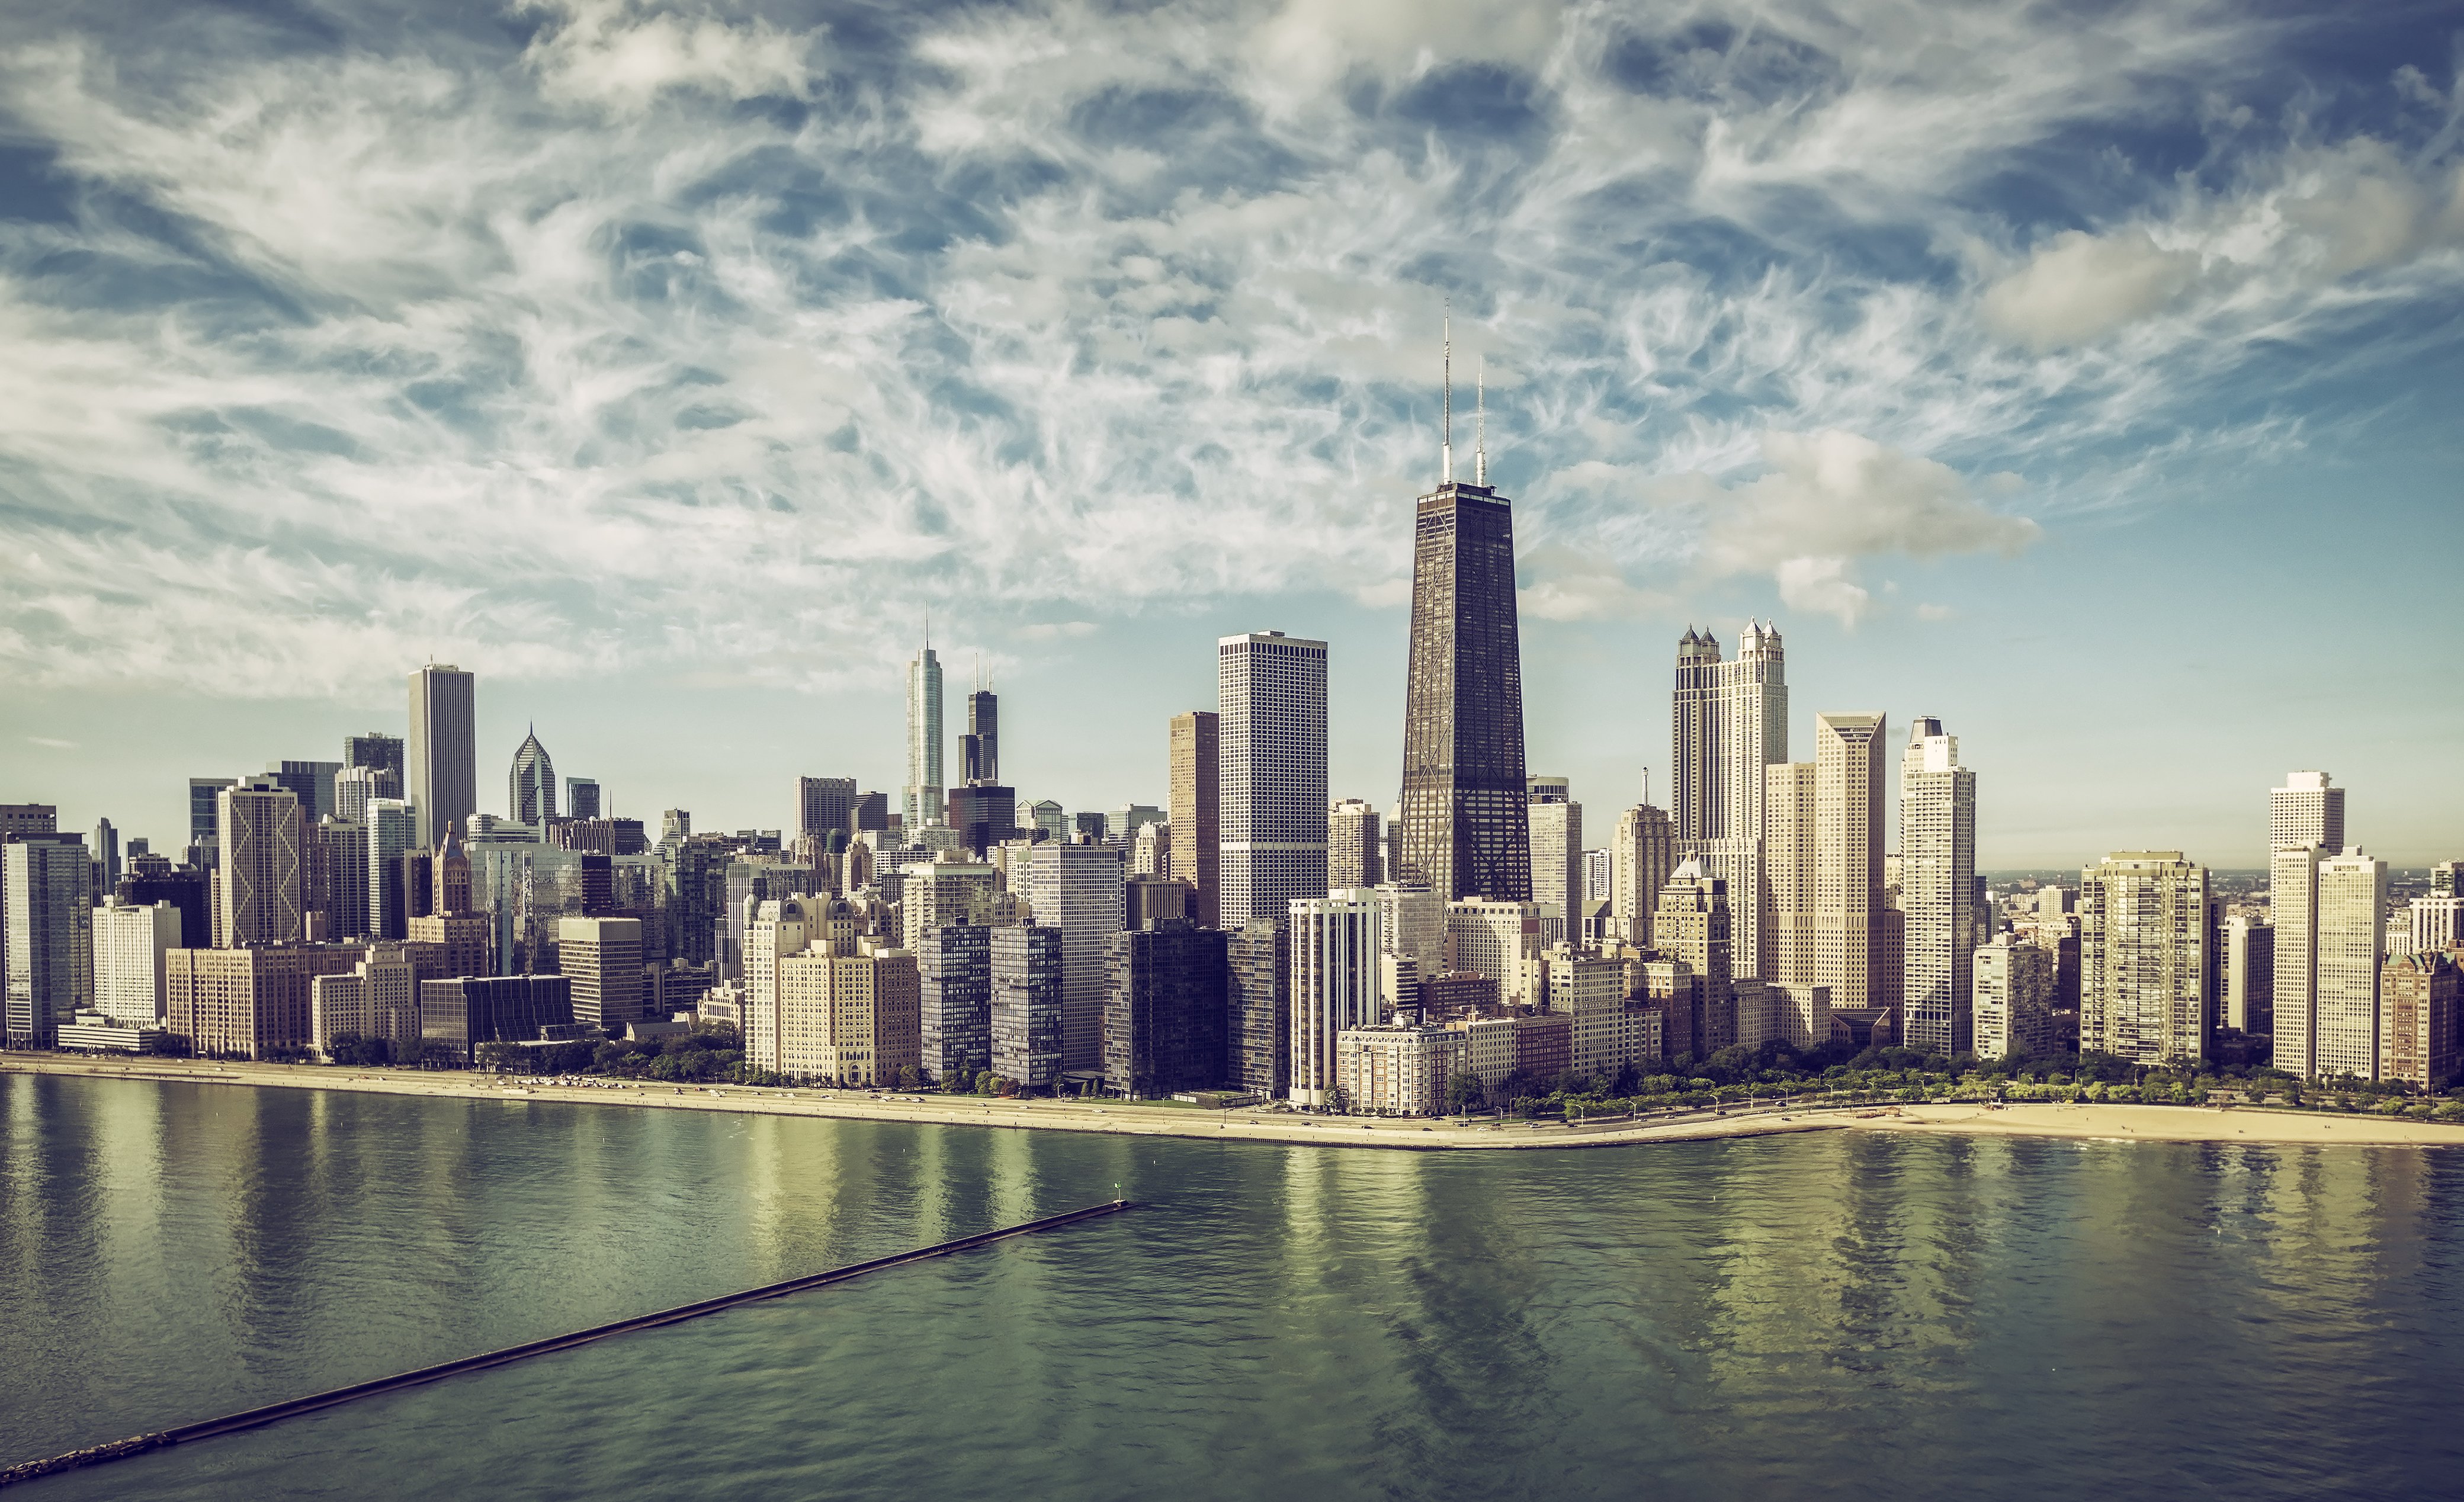 Pictured is the Chicago skyline. SHUTTERSTOCK/ marchello74